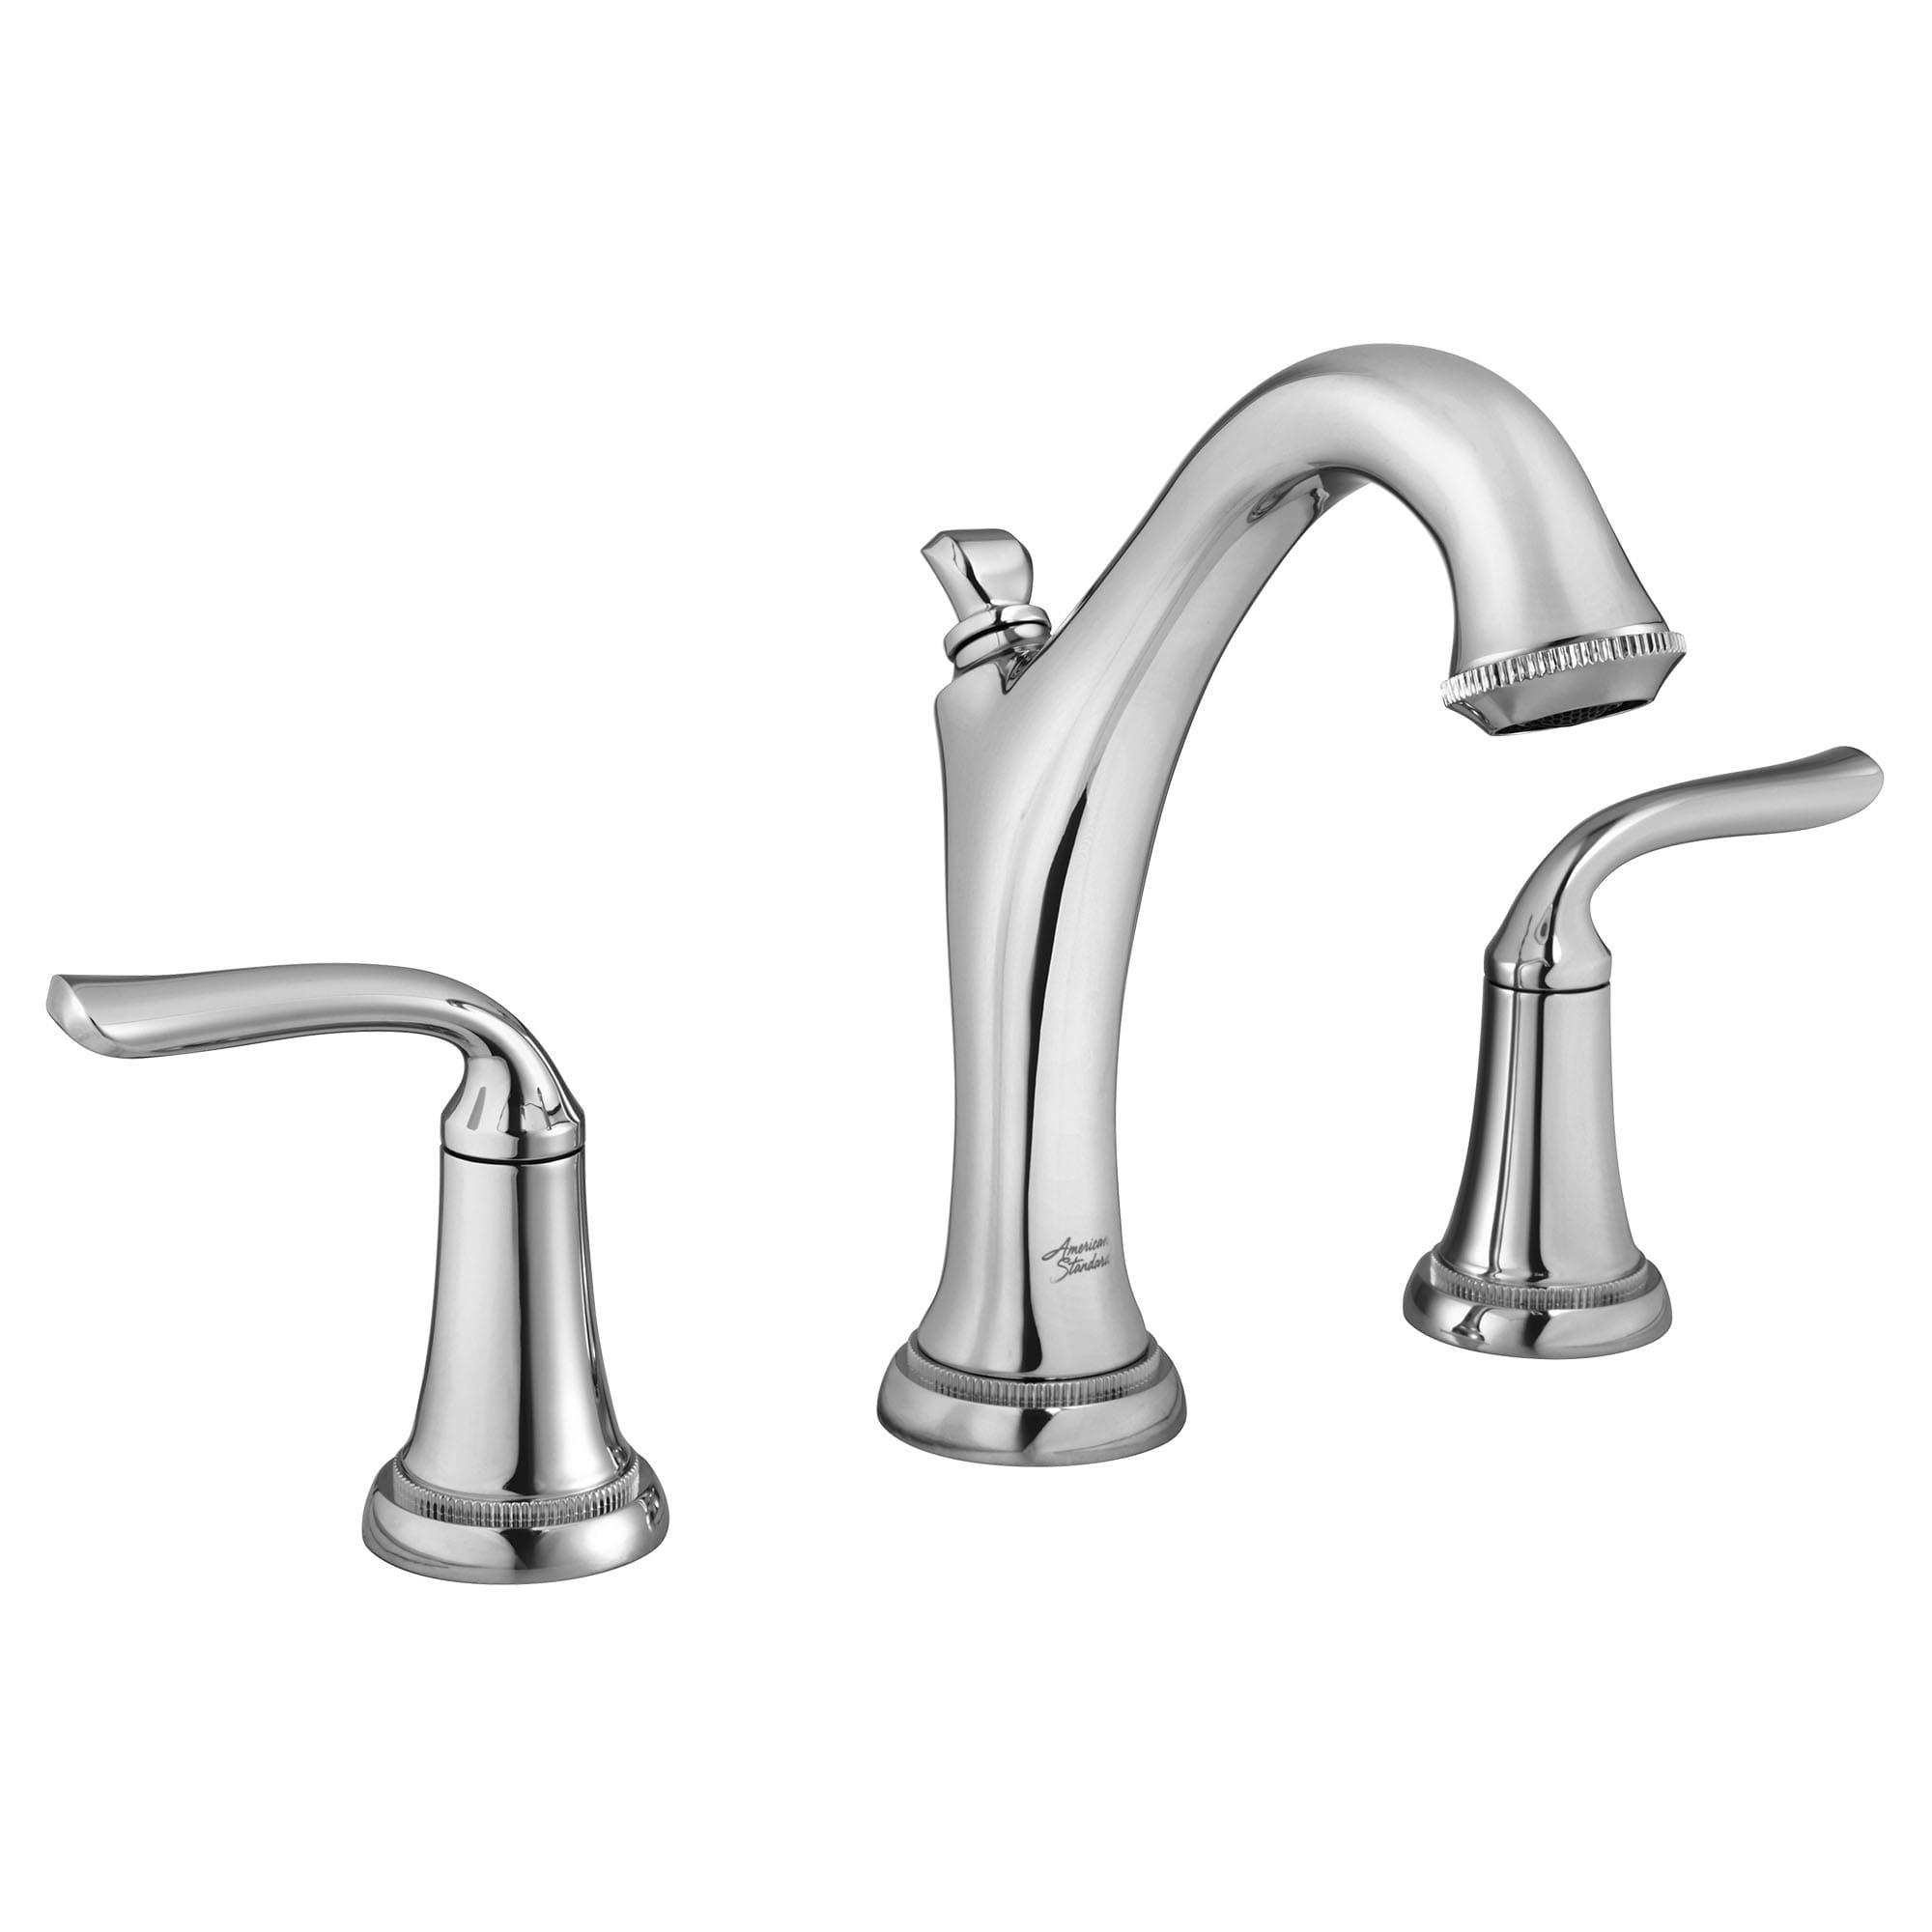 Patience® 8-Inch Widespread 2-Handle Bathroom Faucet 1.2 gpm/4.5 L/min With Lever Handles